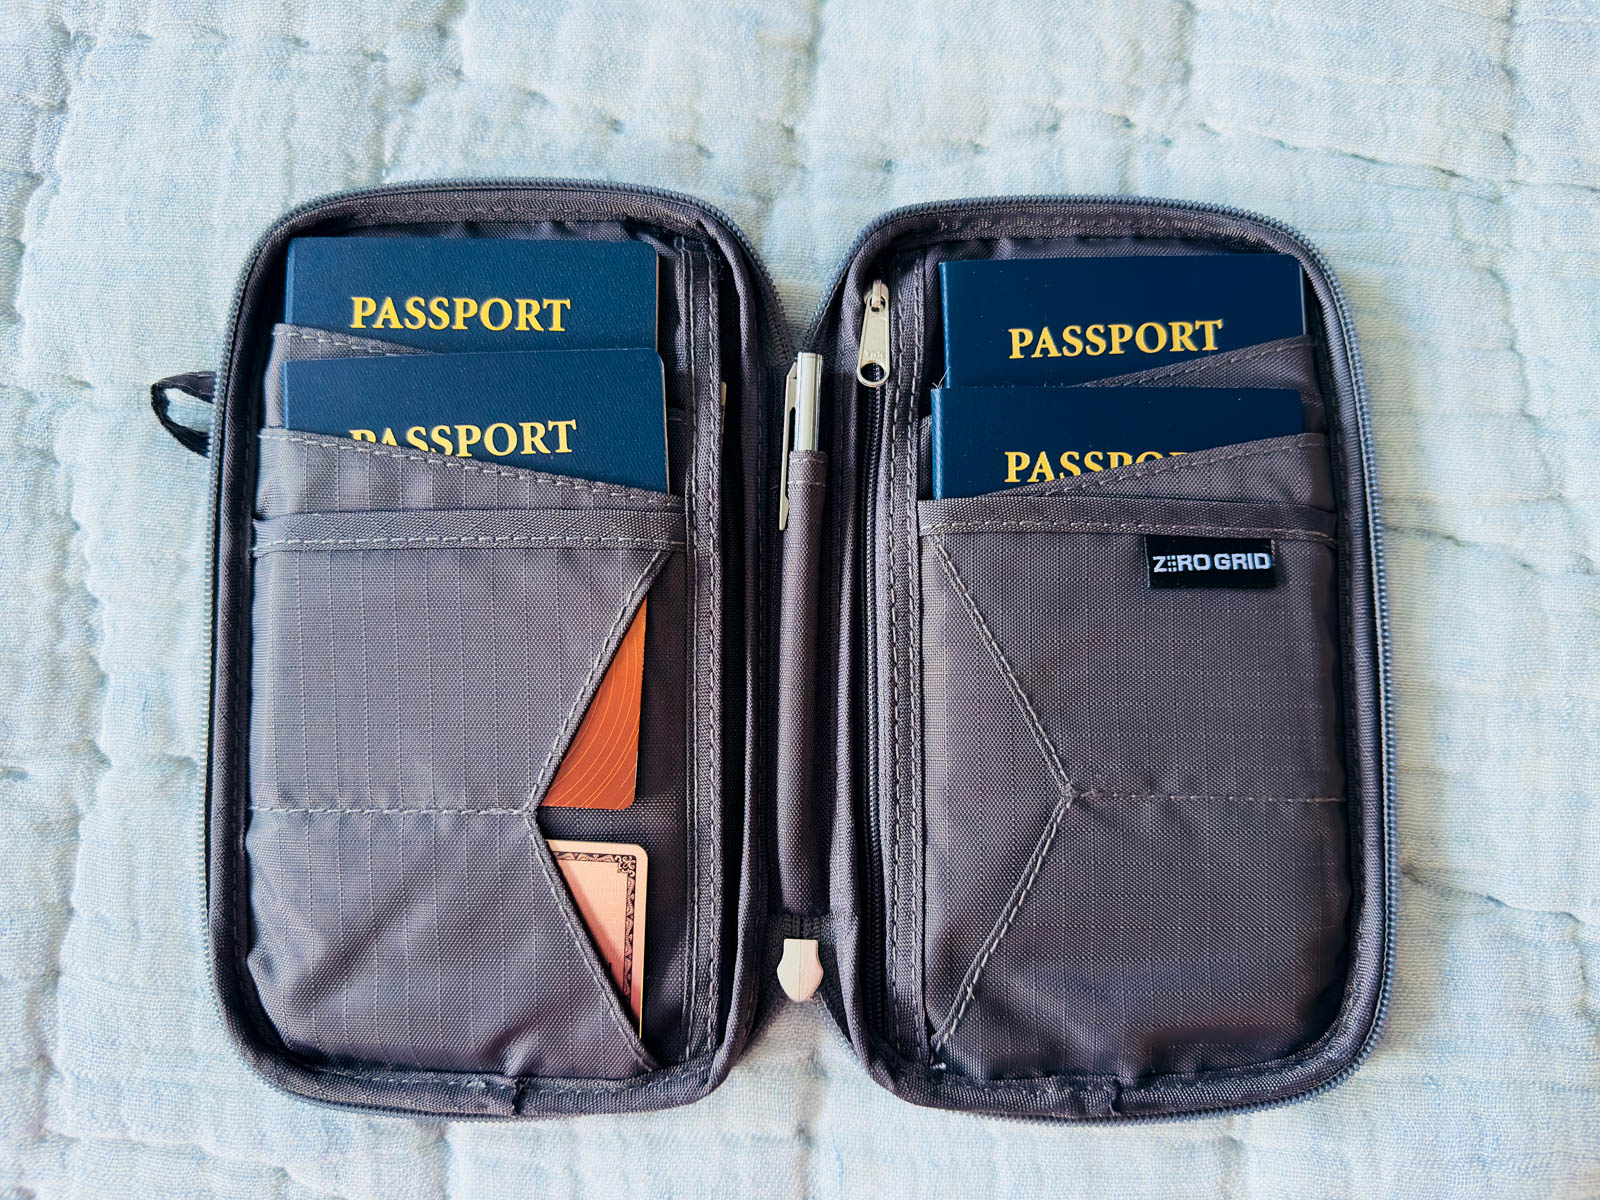 A travel folio is filled with 4 passports and credit cards.